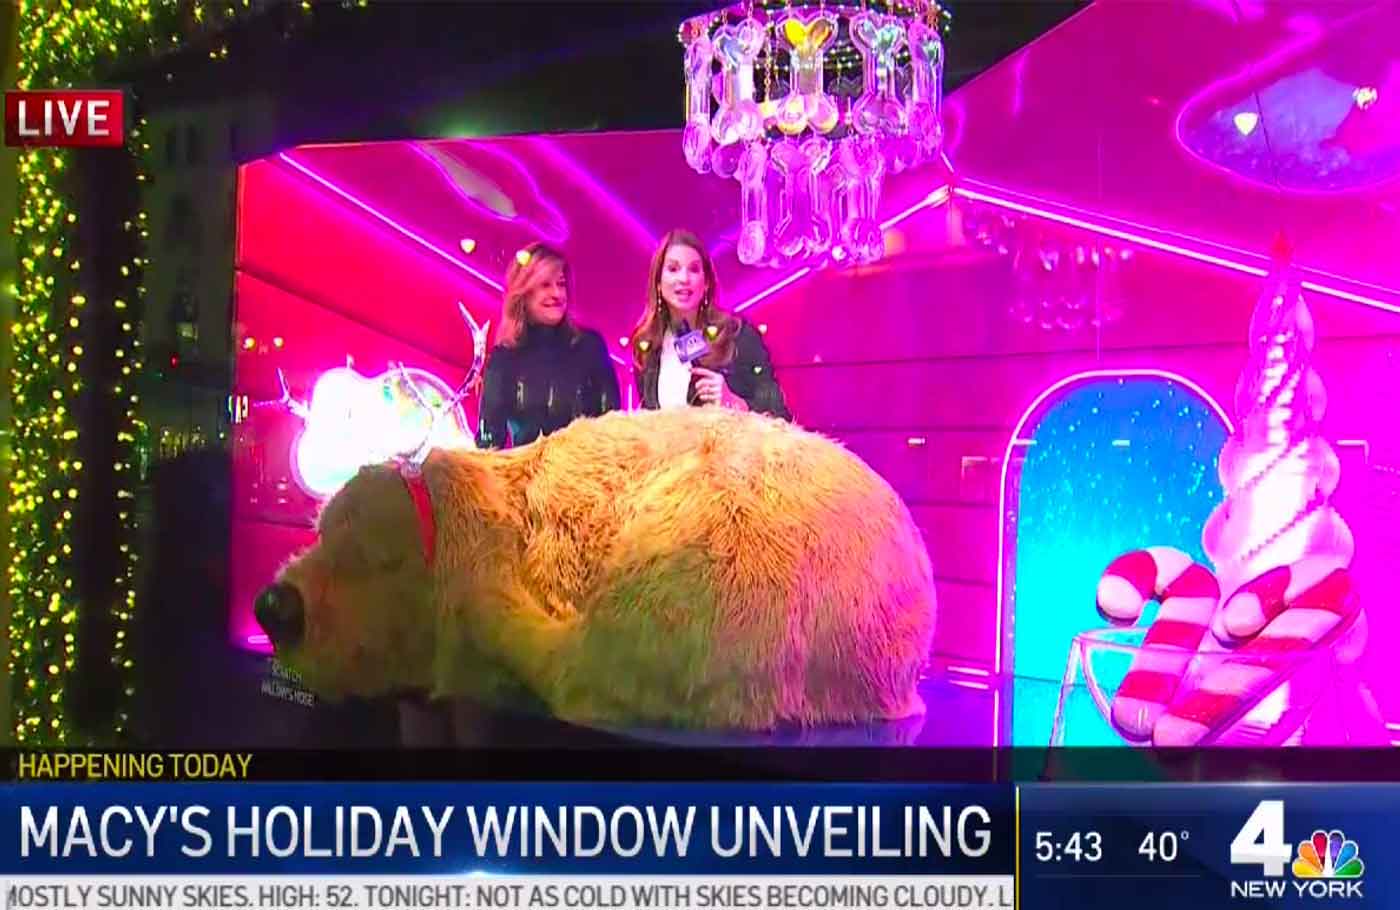 Macy’s to Unveil Holiday Windows Ahead of Thanksgiving